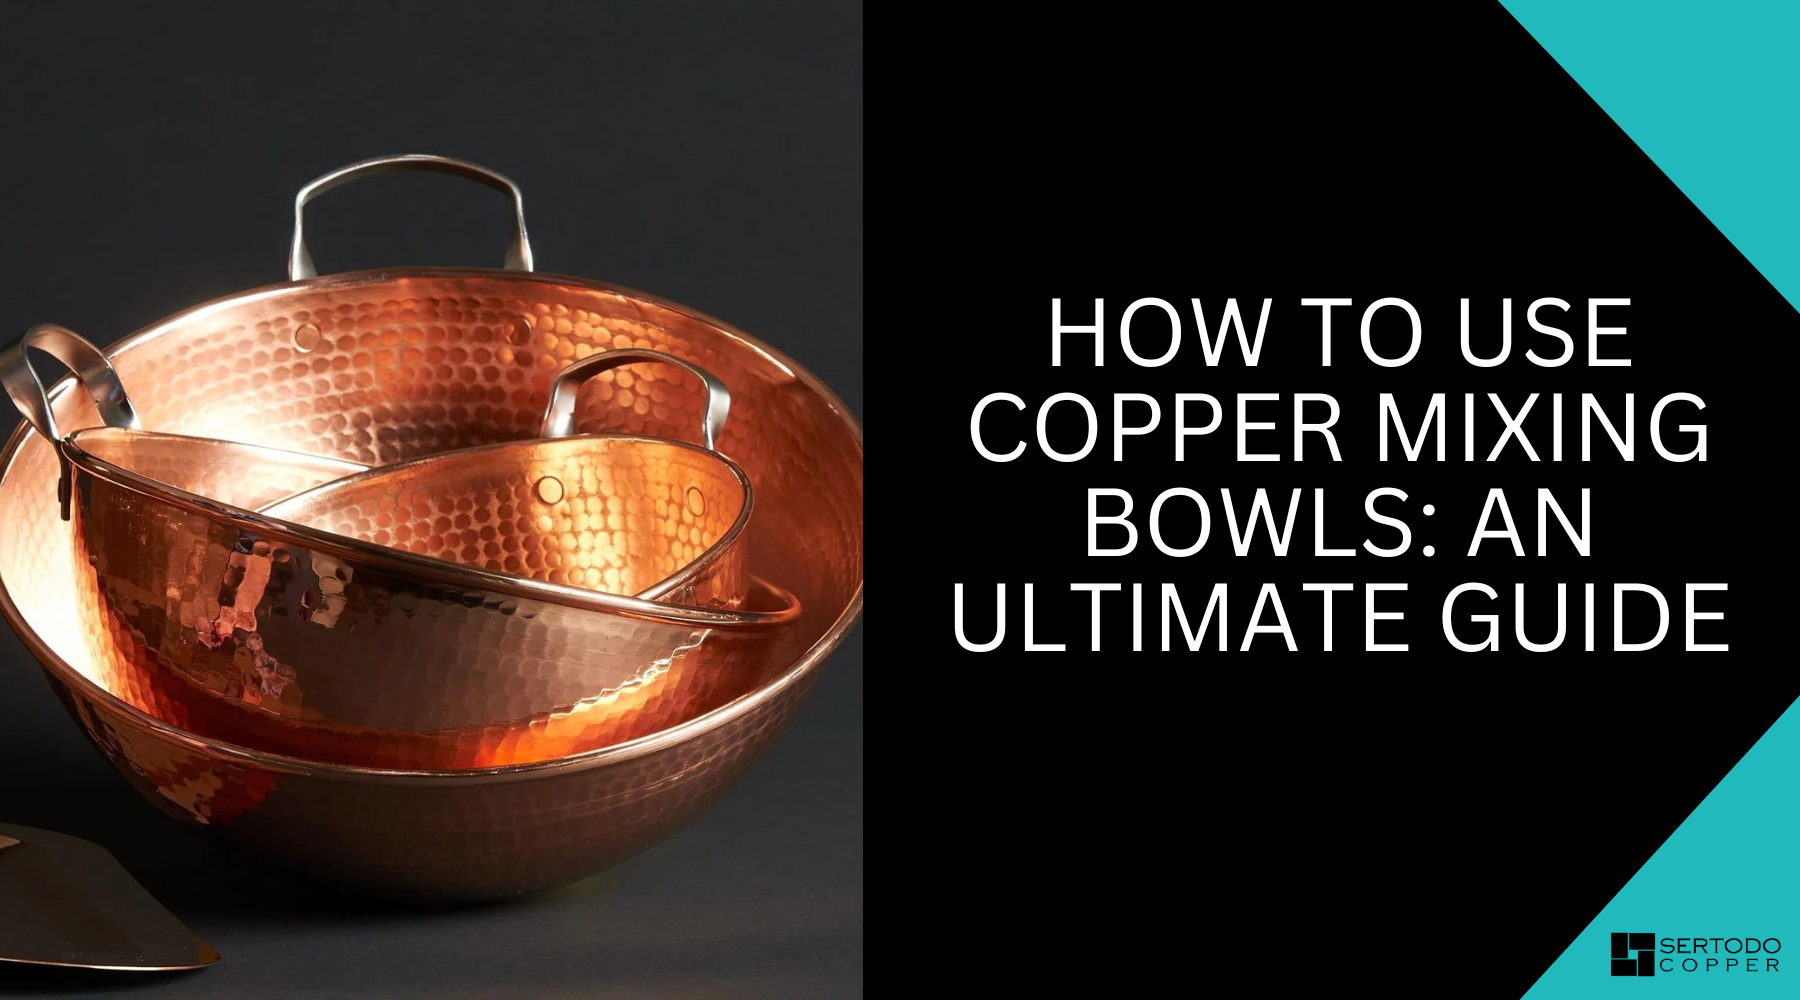 How To Use Copper Mixing Bowls: An Ultimate Guide